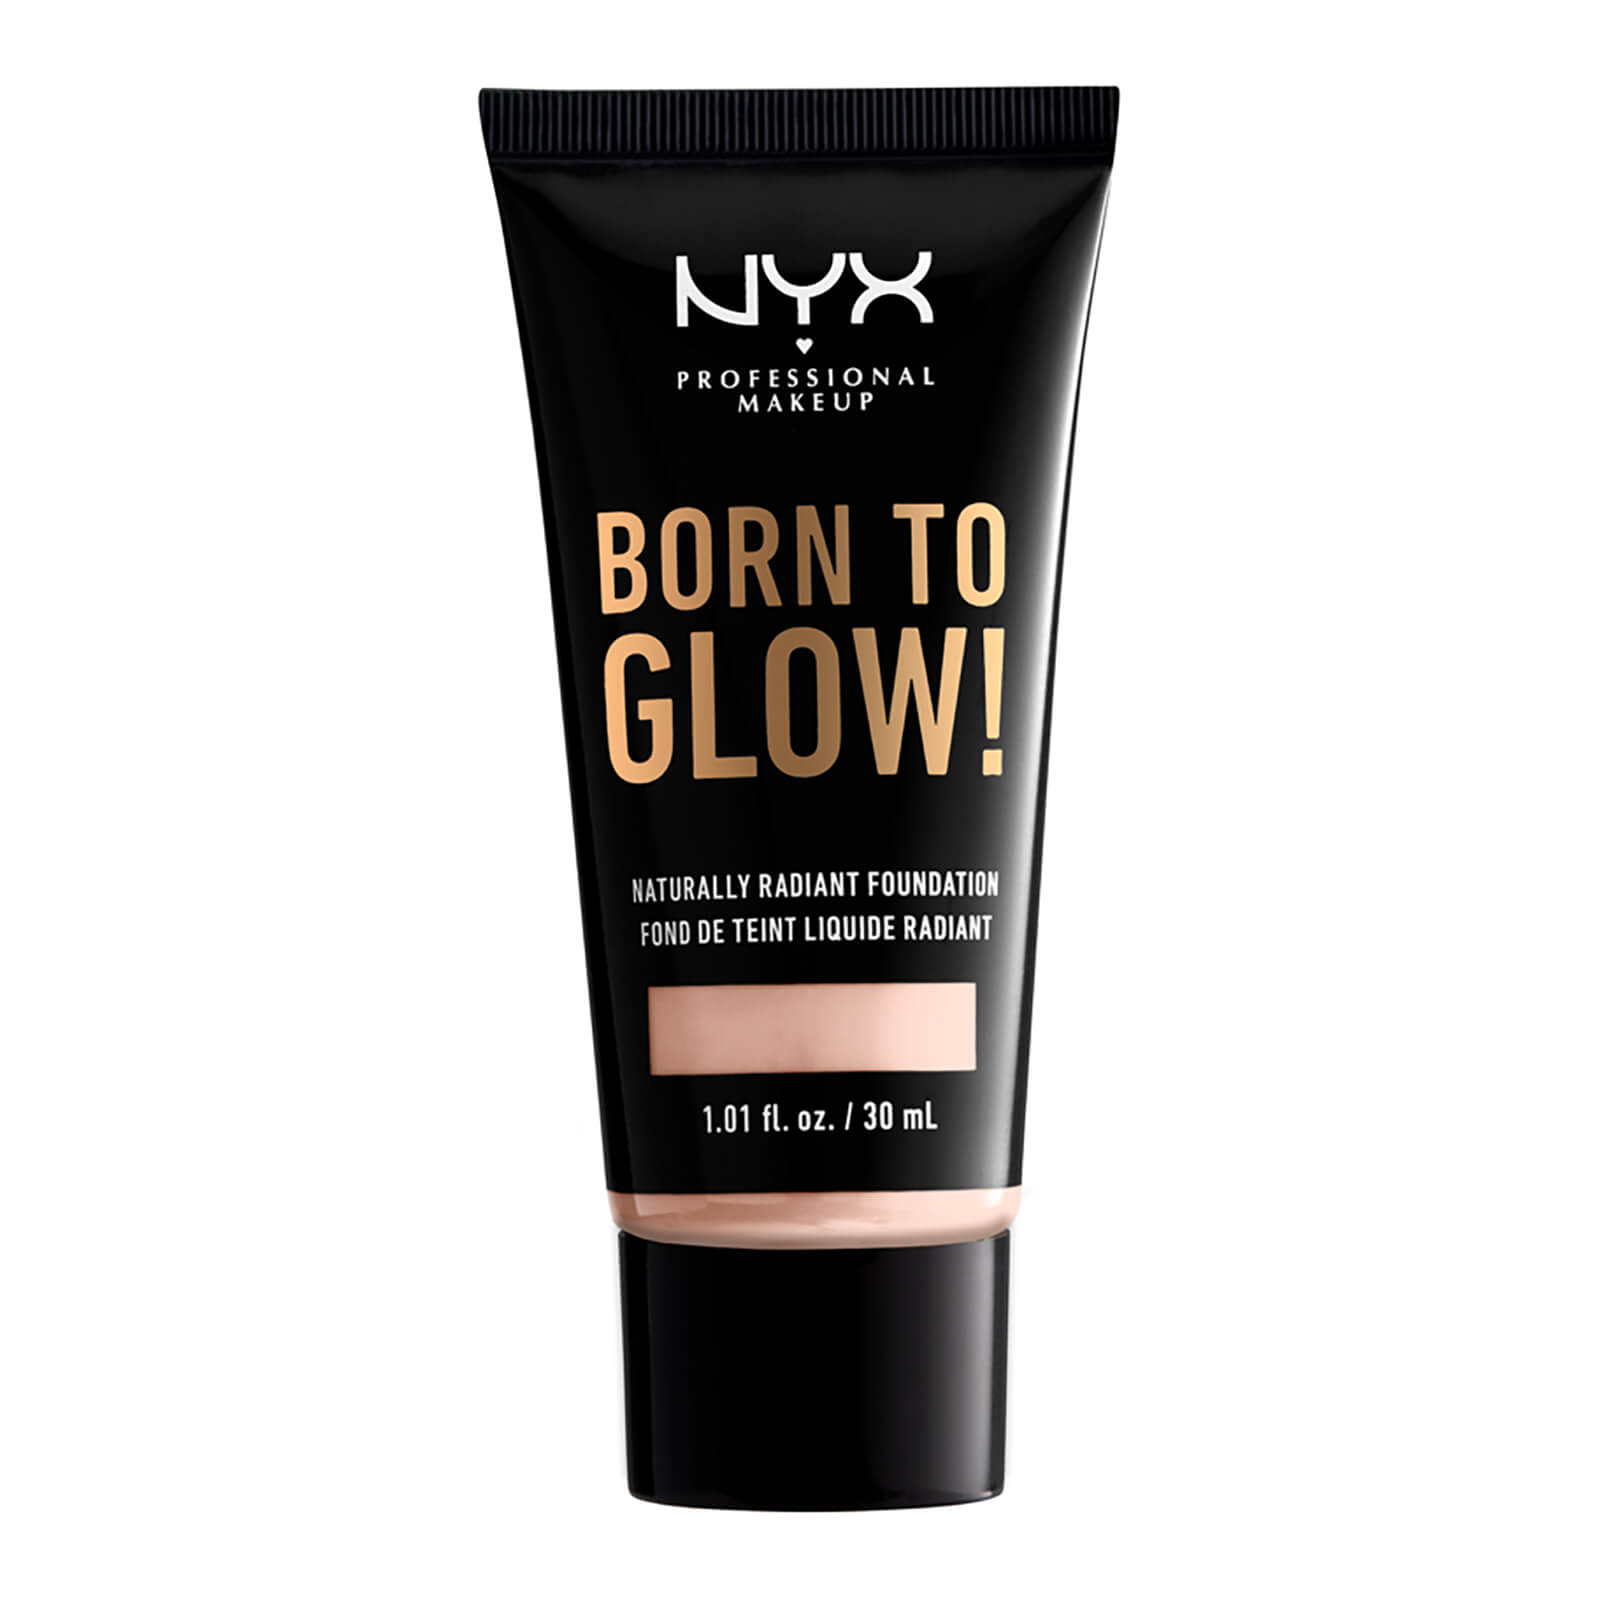 NYX Professional Makeup Born to Glow Naturally Radiant Foundation 30ml (Various Shades) - Light Porcelain